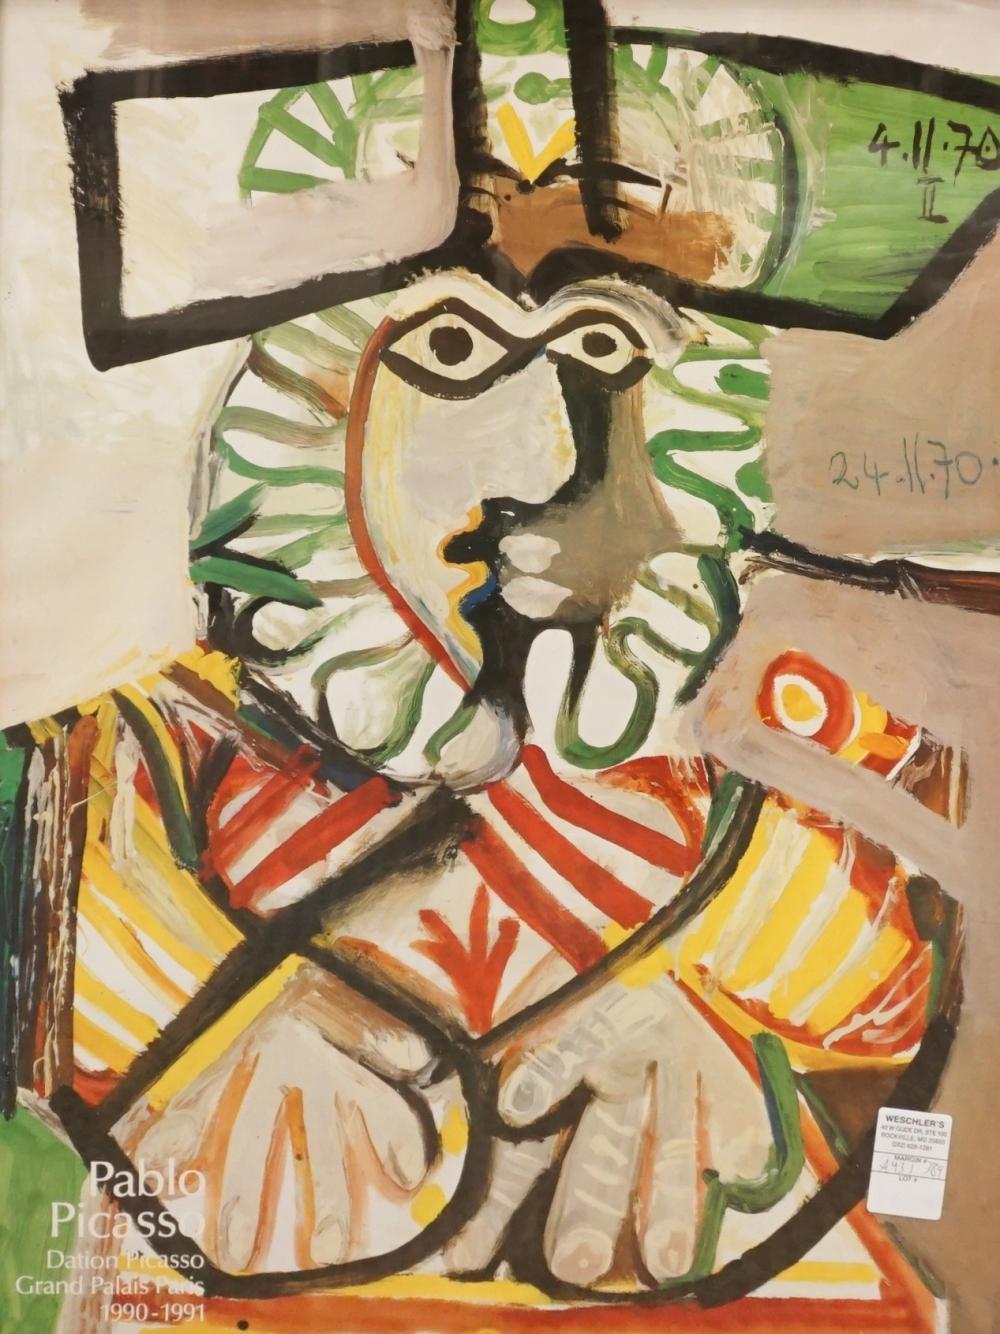 AFTER PABLO PICASSO, MUSEUM POSTER